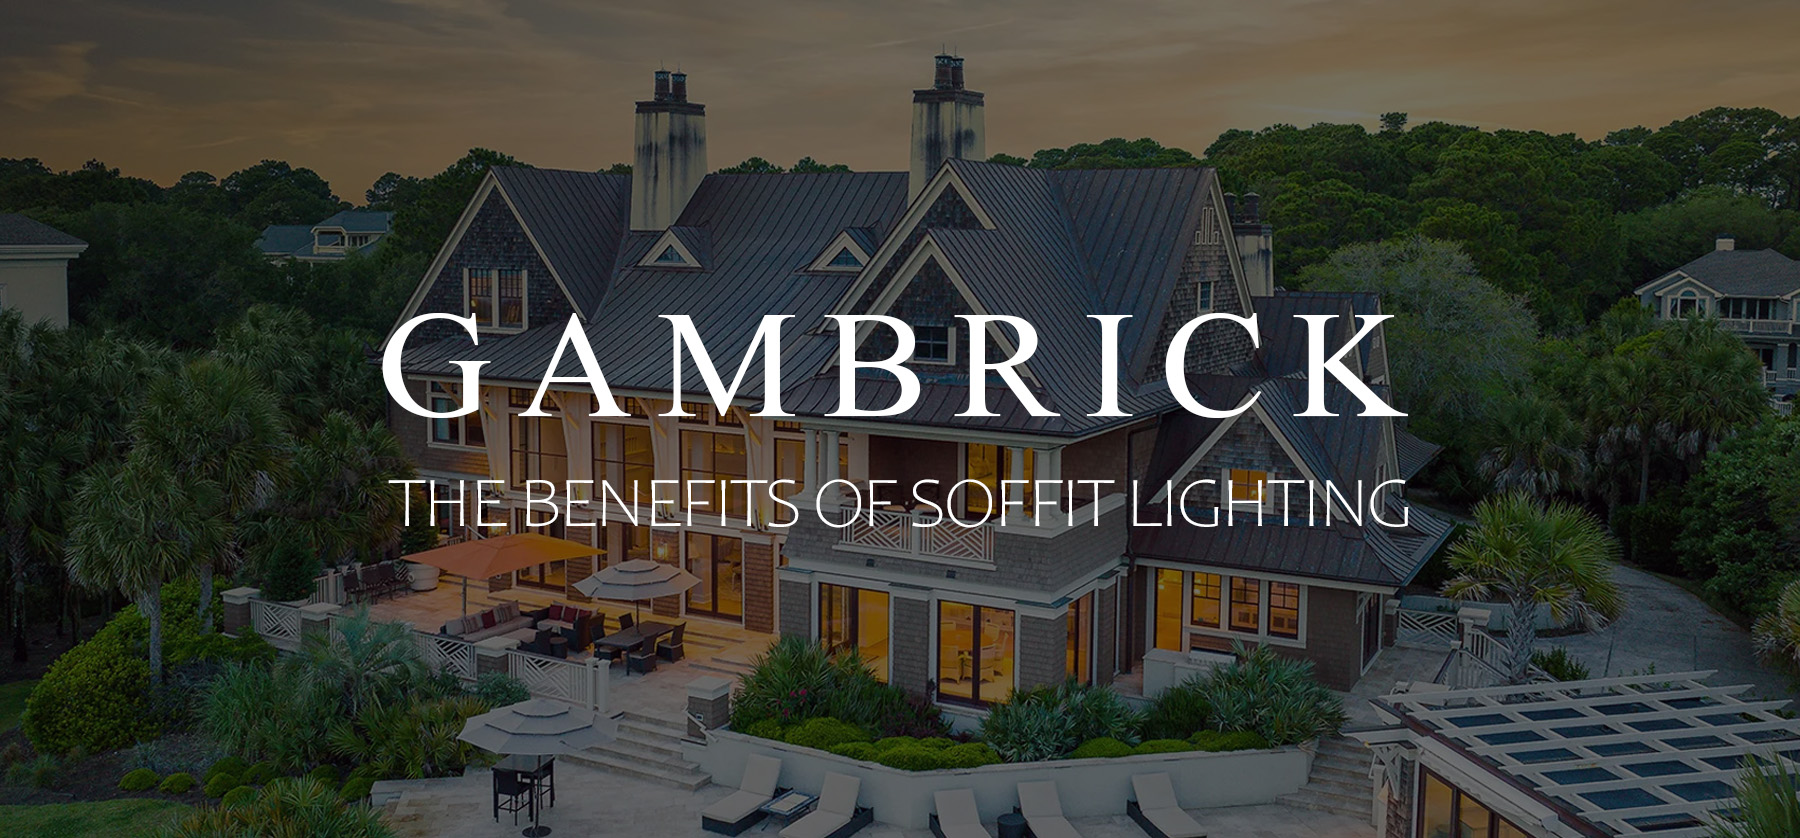 the benefits of soffit lighting banner 1.0